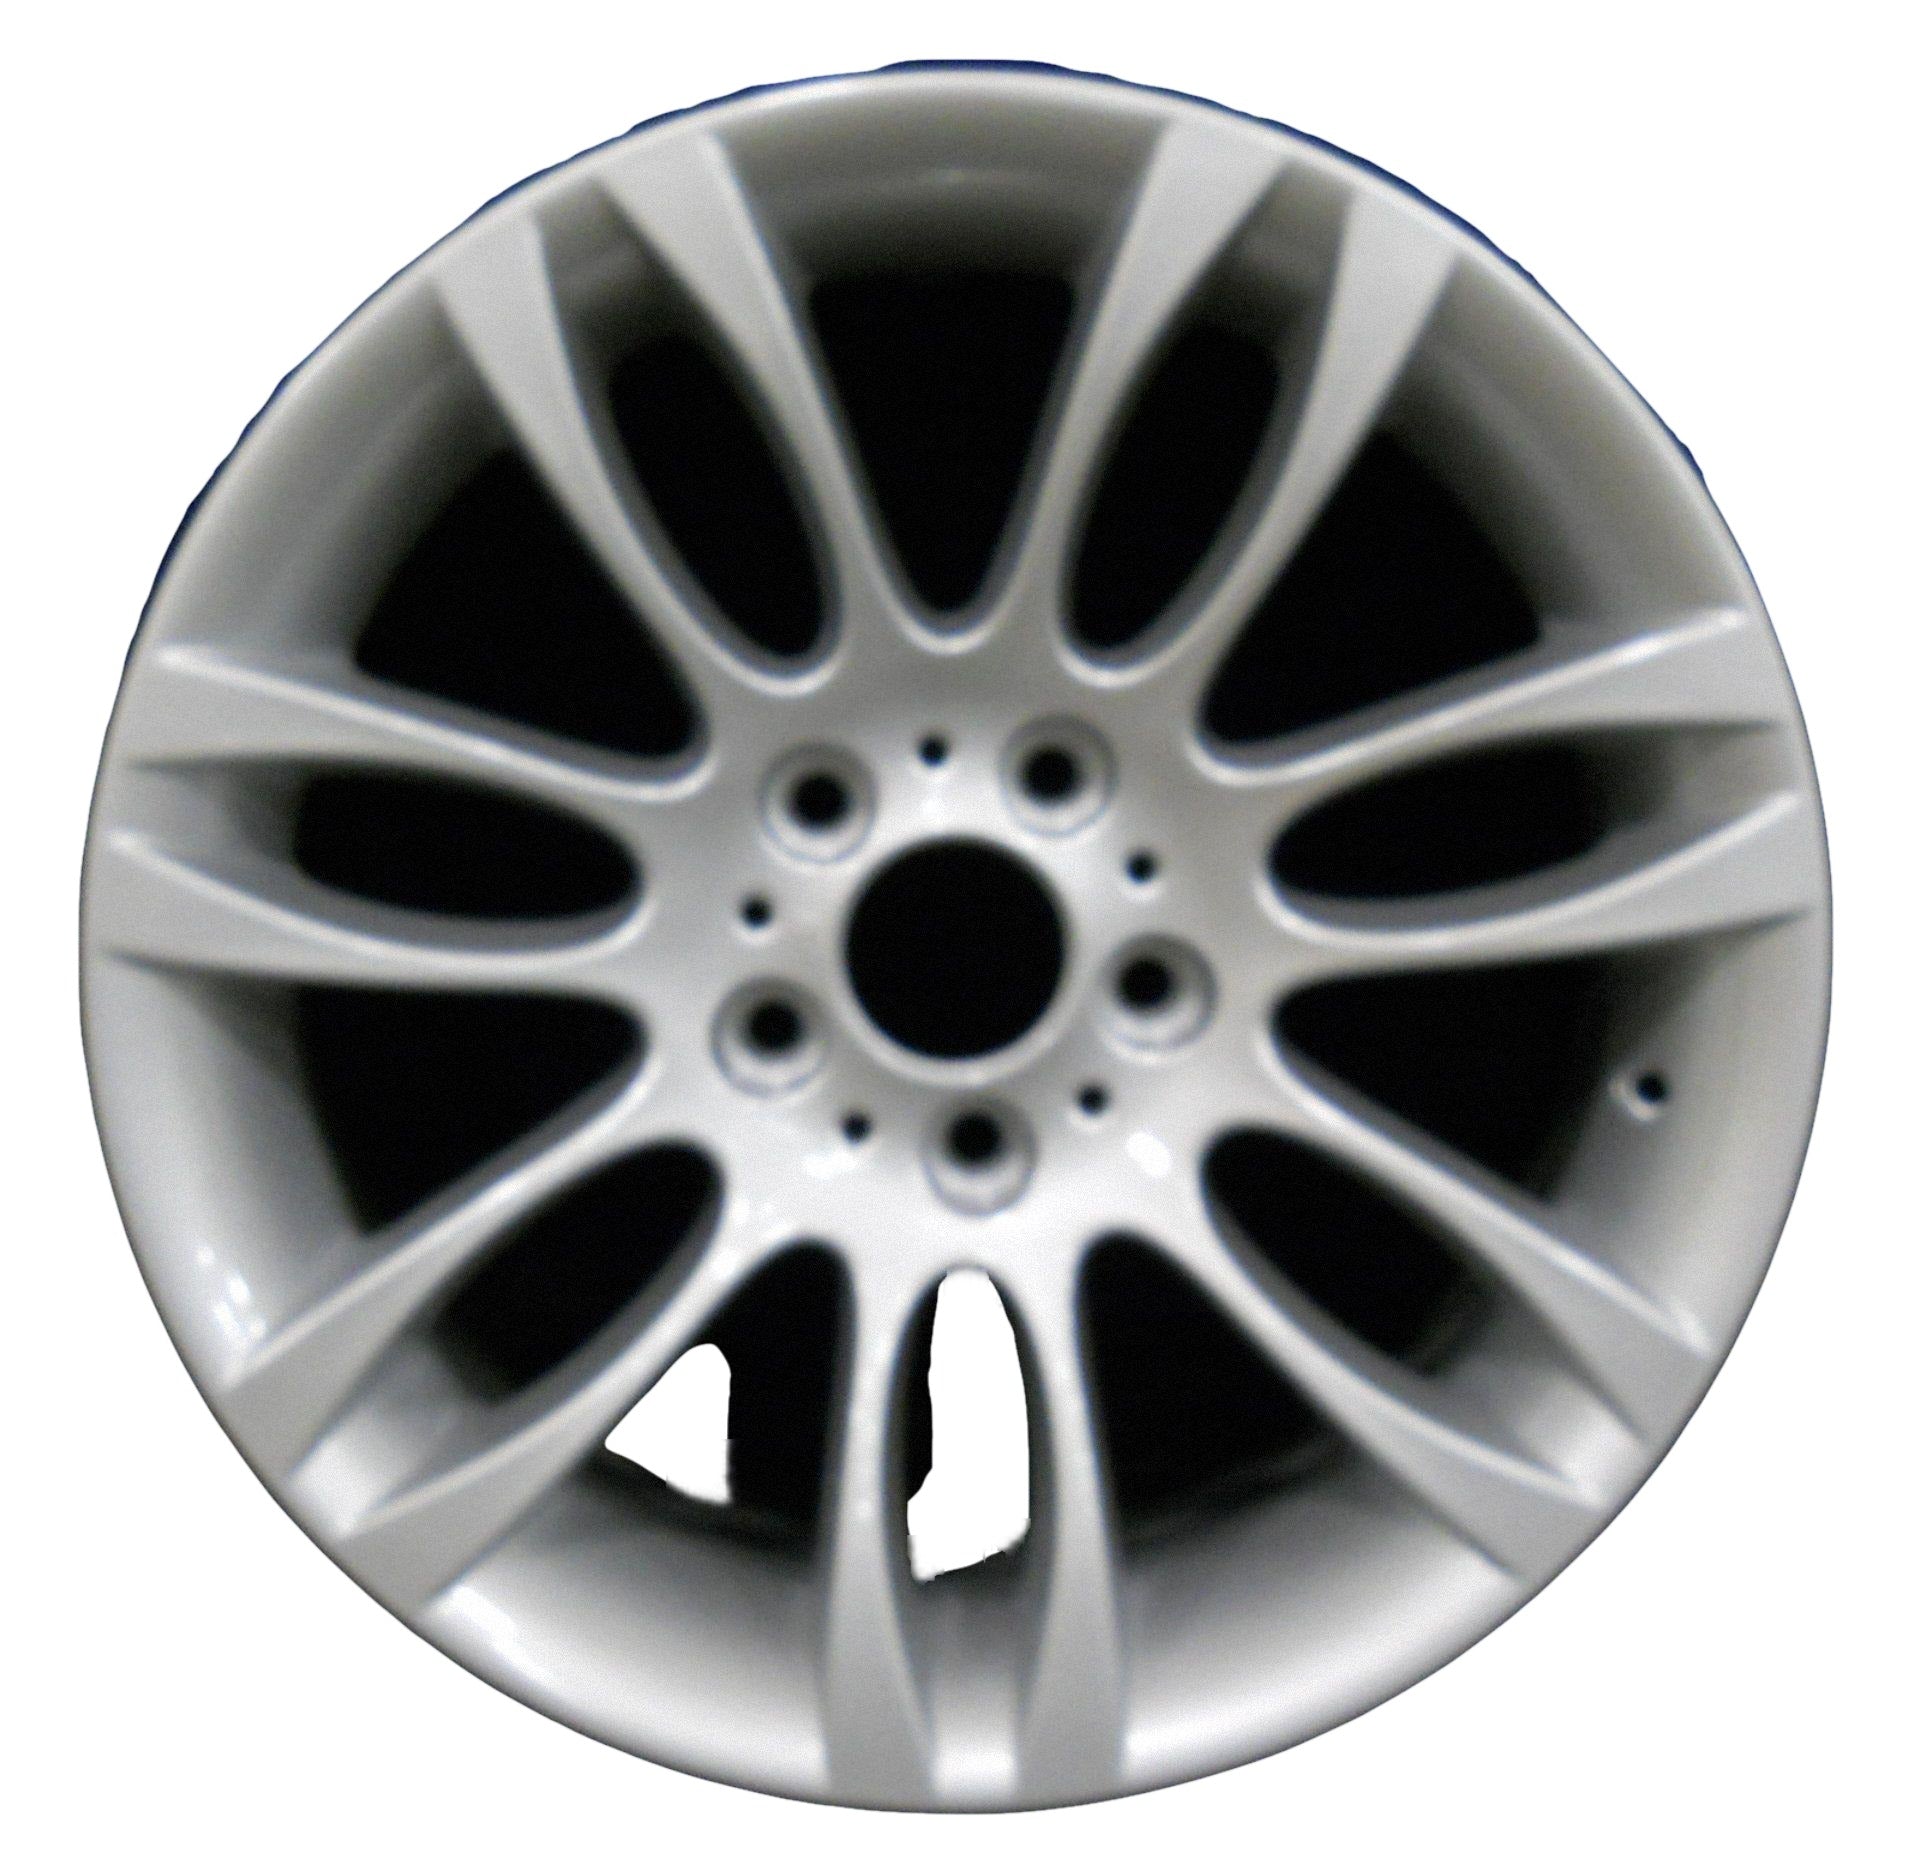 BMW 323i  2006, 2007, 2008, 2009, 2010, 2011 Factory OEM Car Wheel Size 18x8.5 Alloy WAO.59595RE.PS06.FF